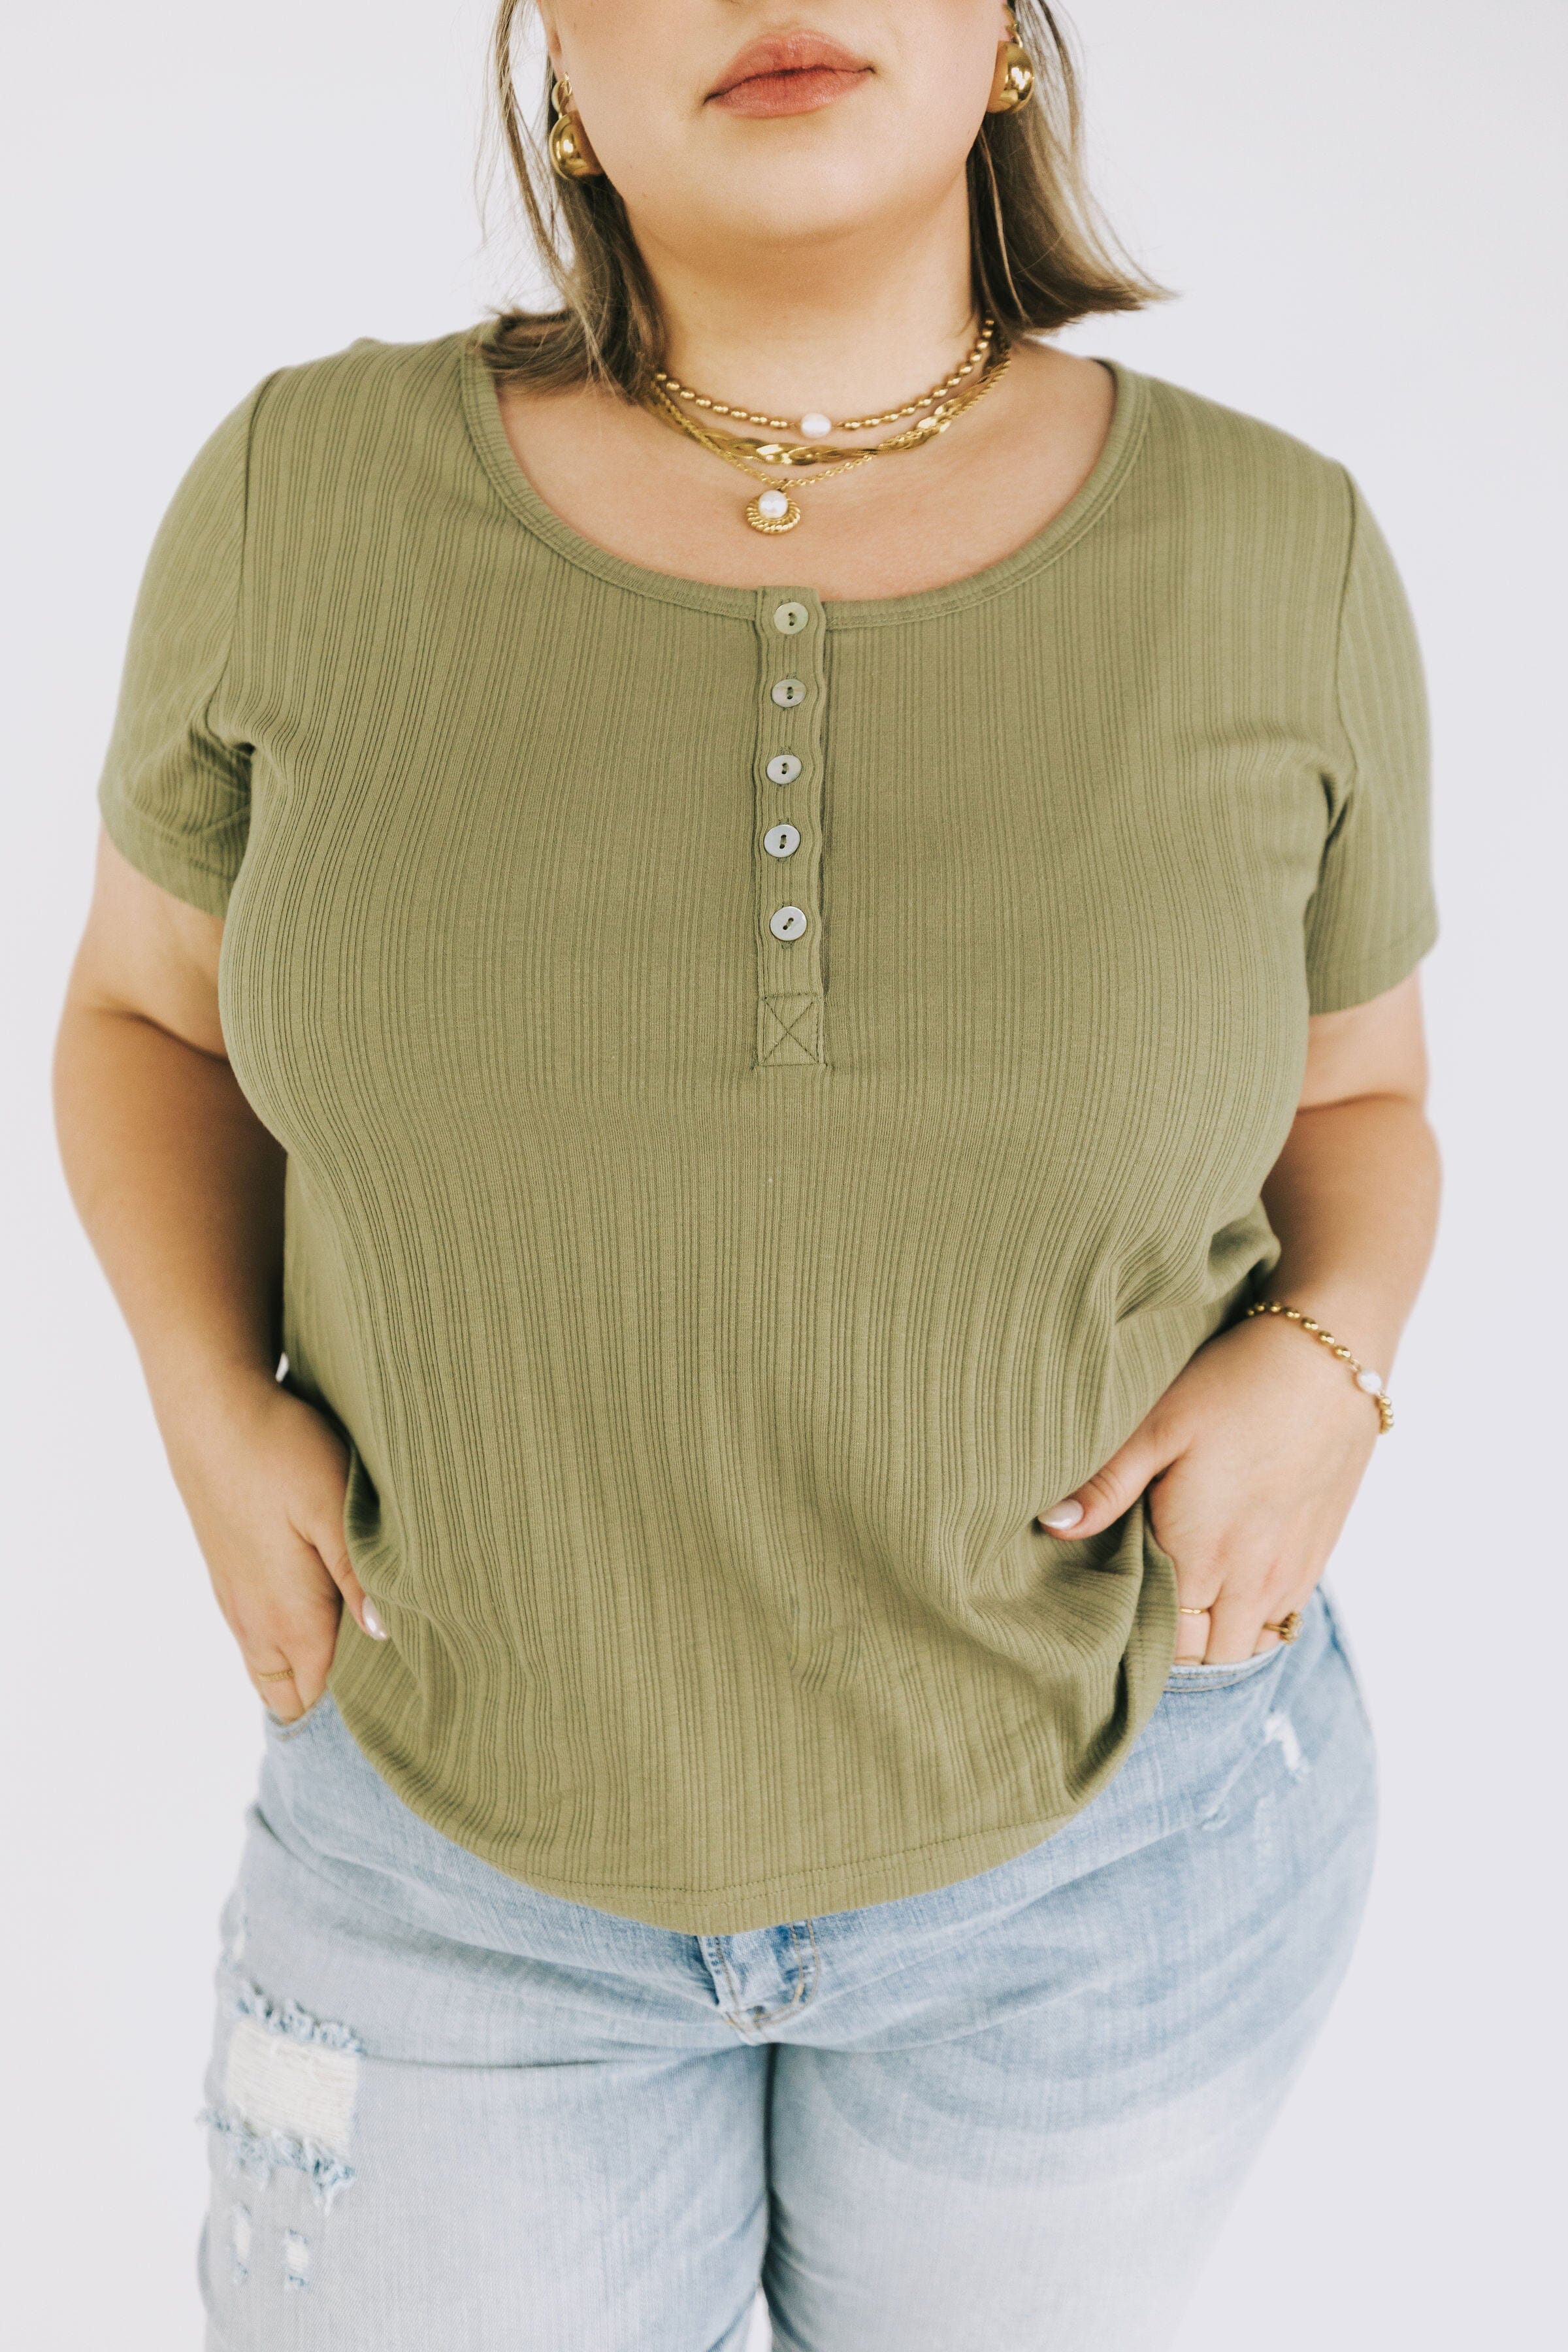 PLUS SIZE - Only Yours Top - 2 Colors!